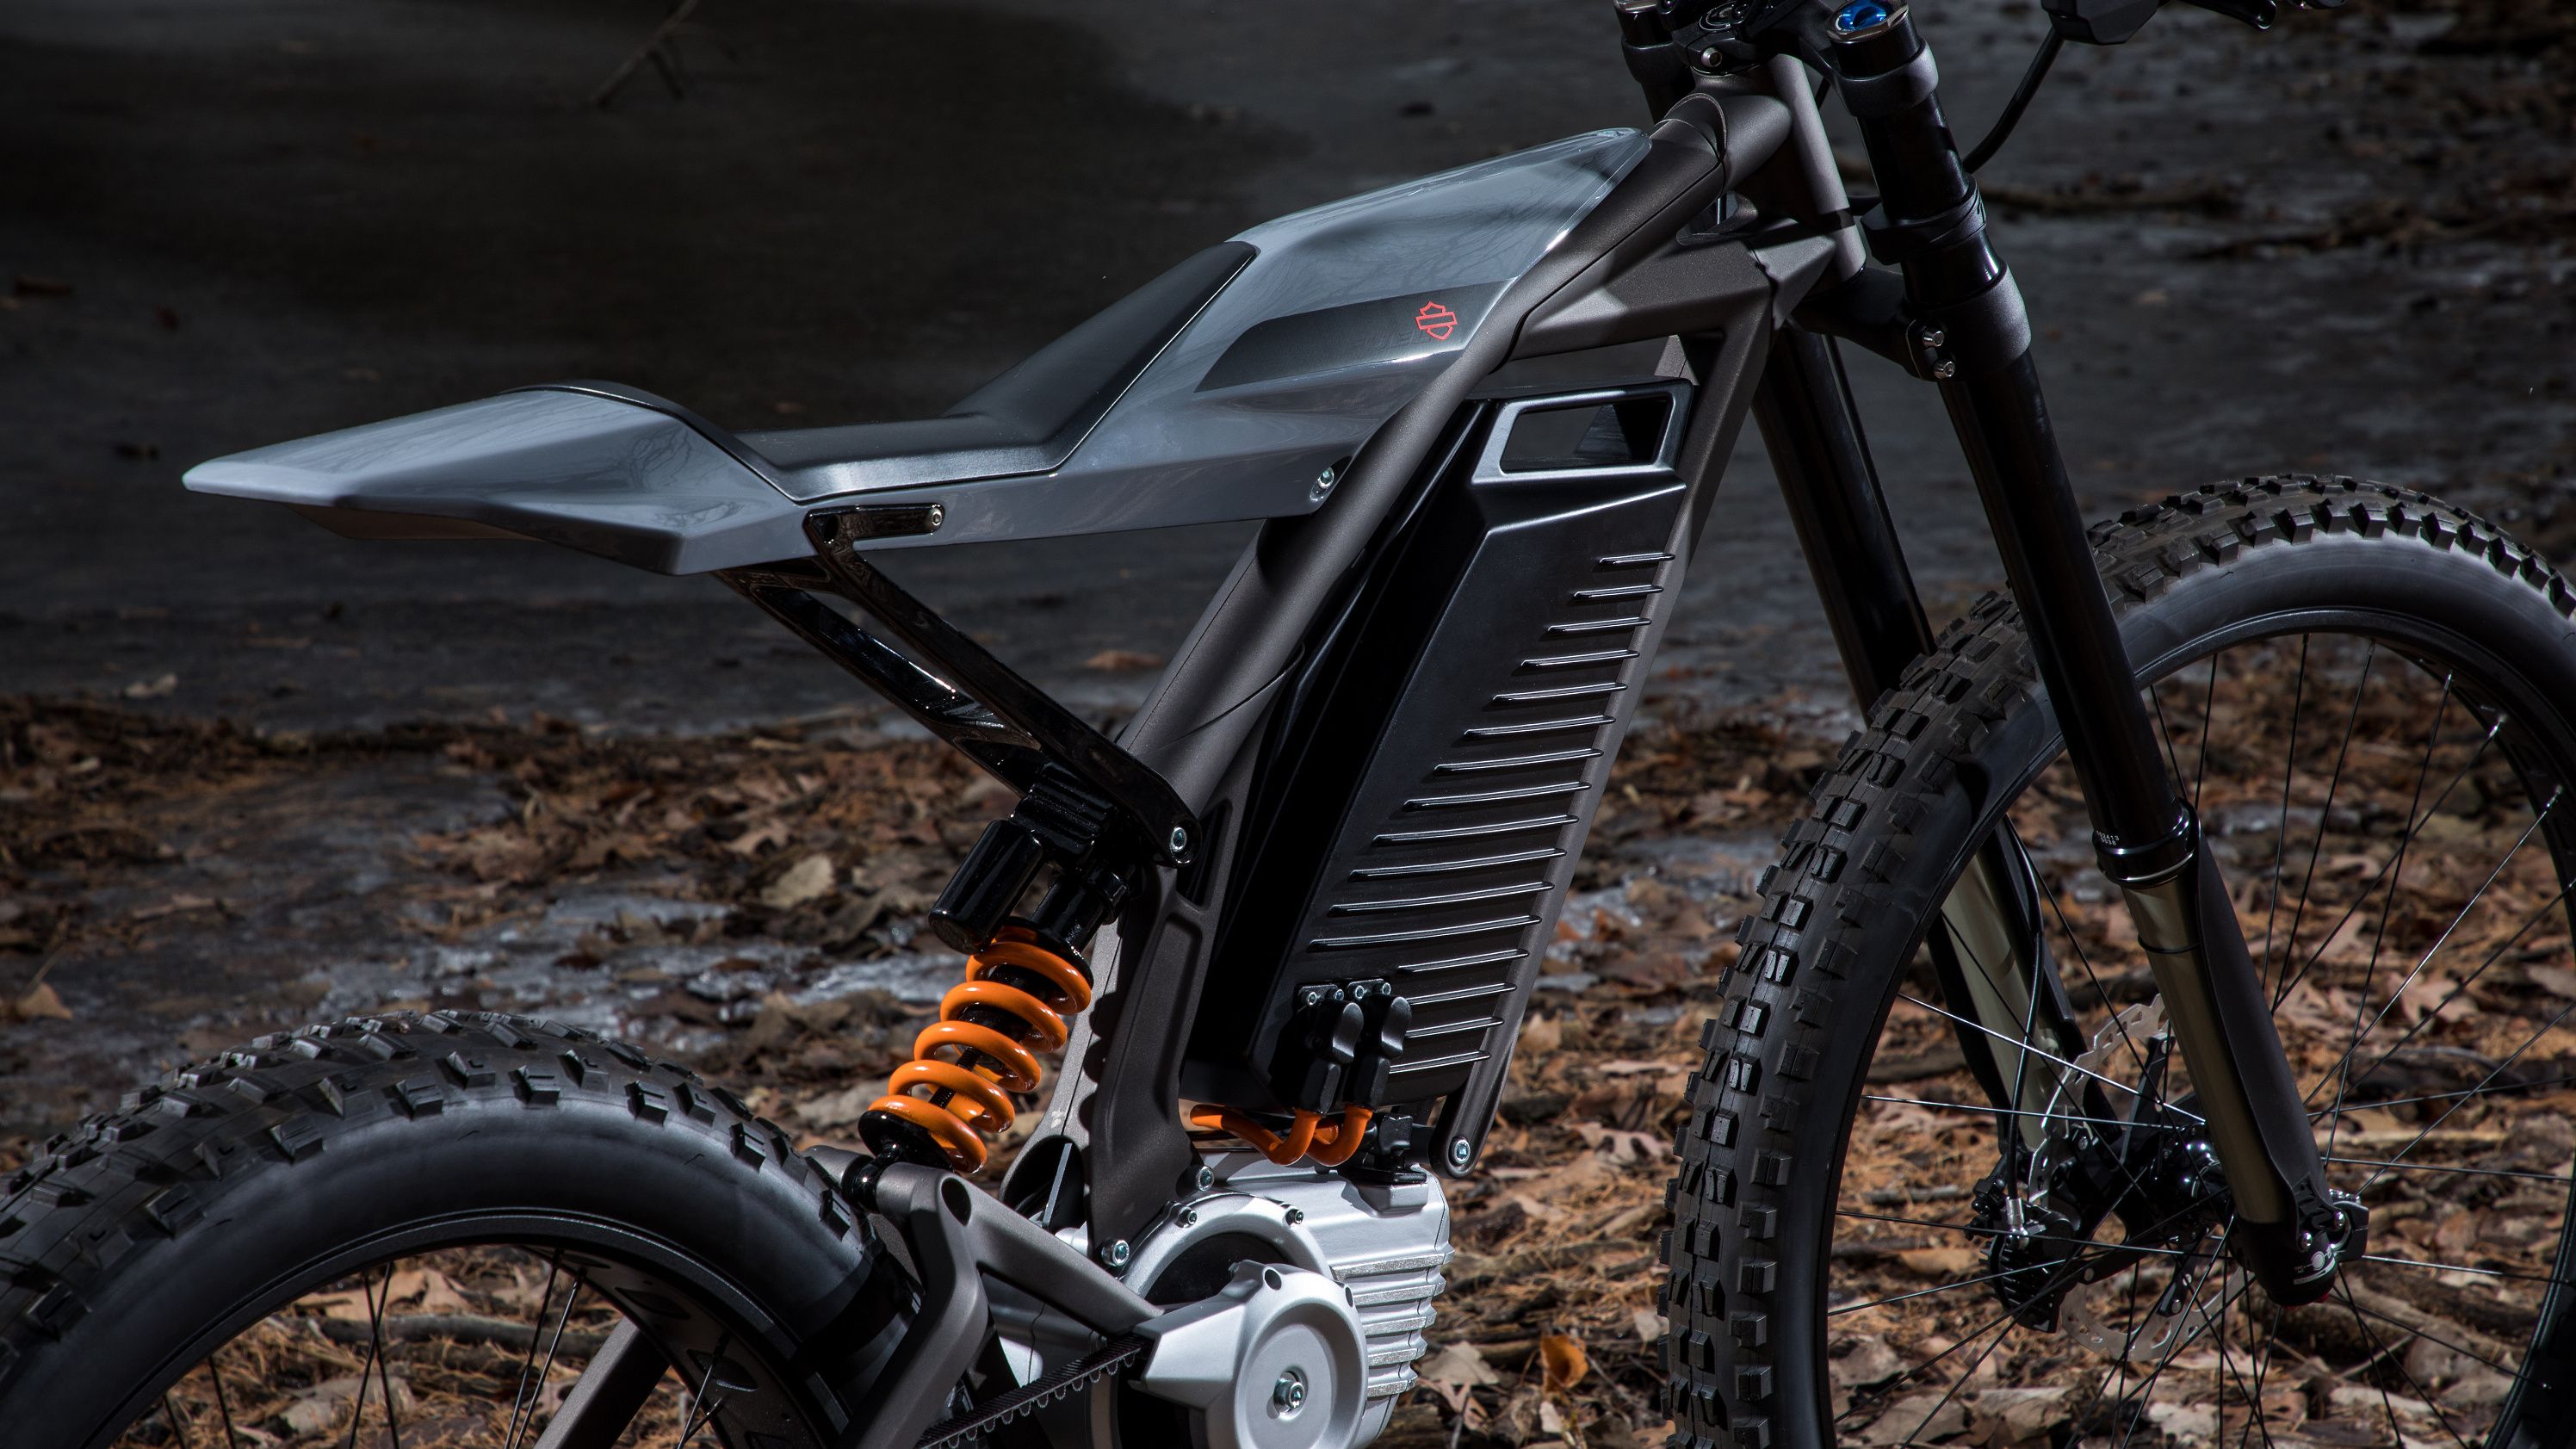 2019 Harley-Davidson Brings Two Electric Concepts To 2019 X-Games